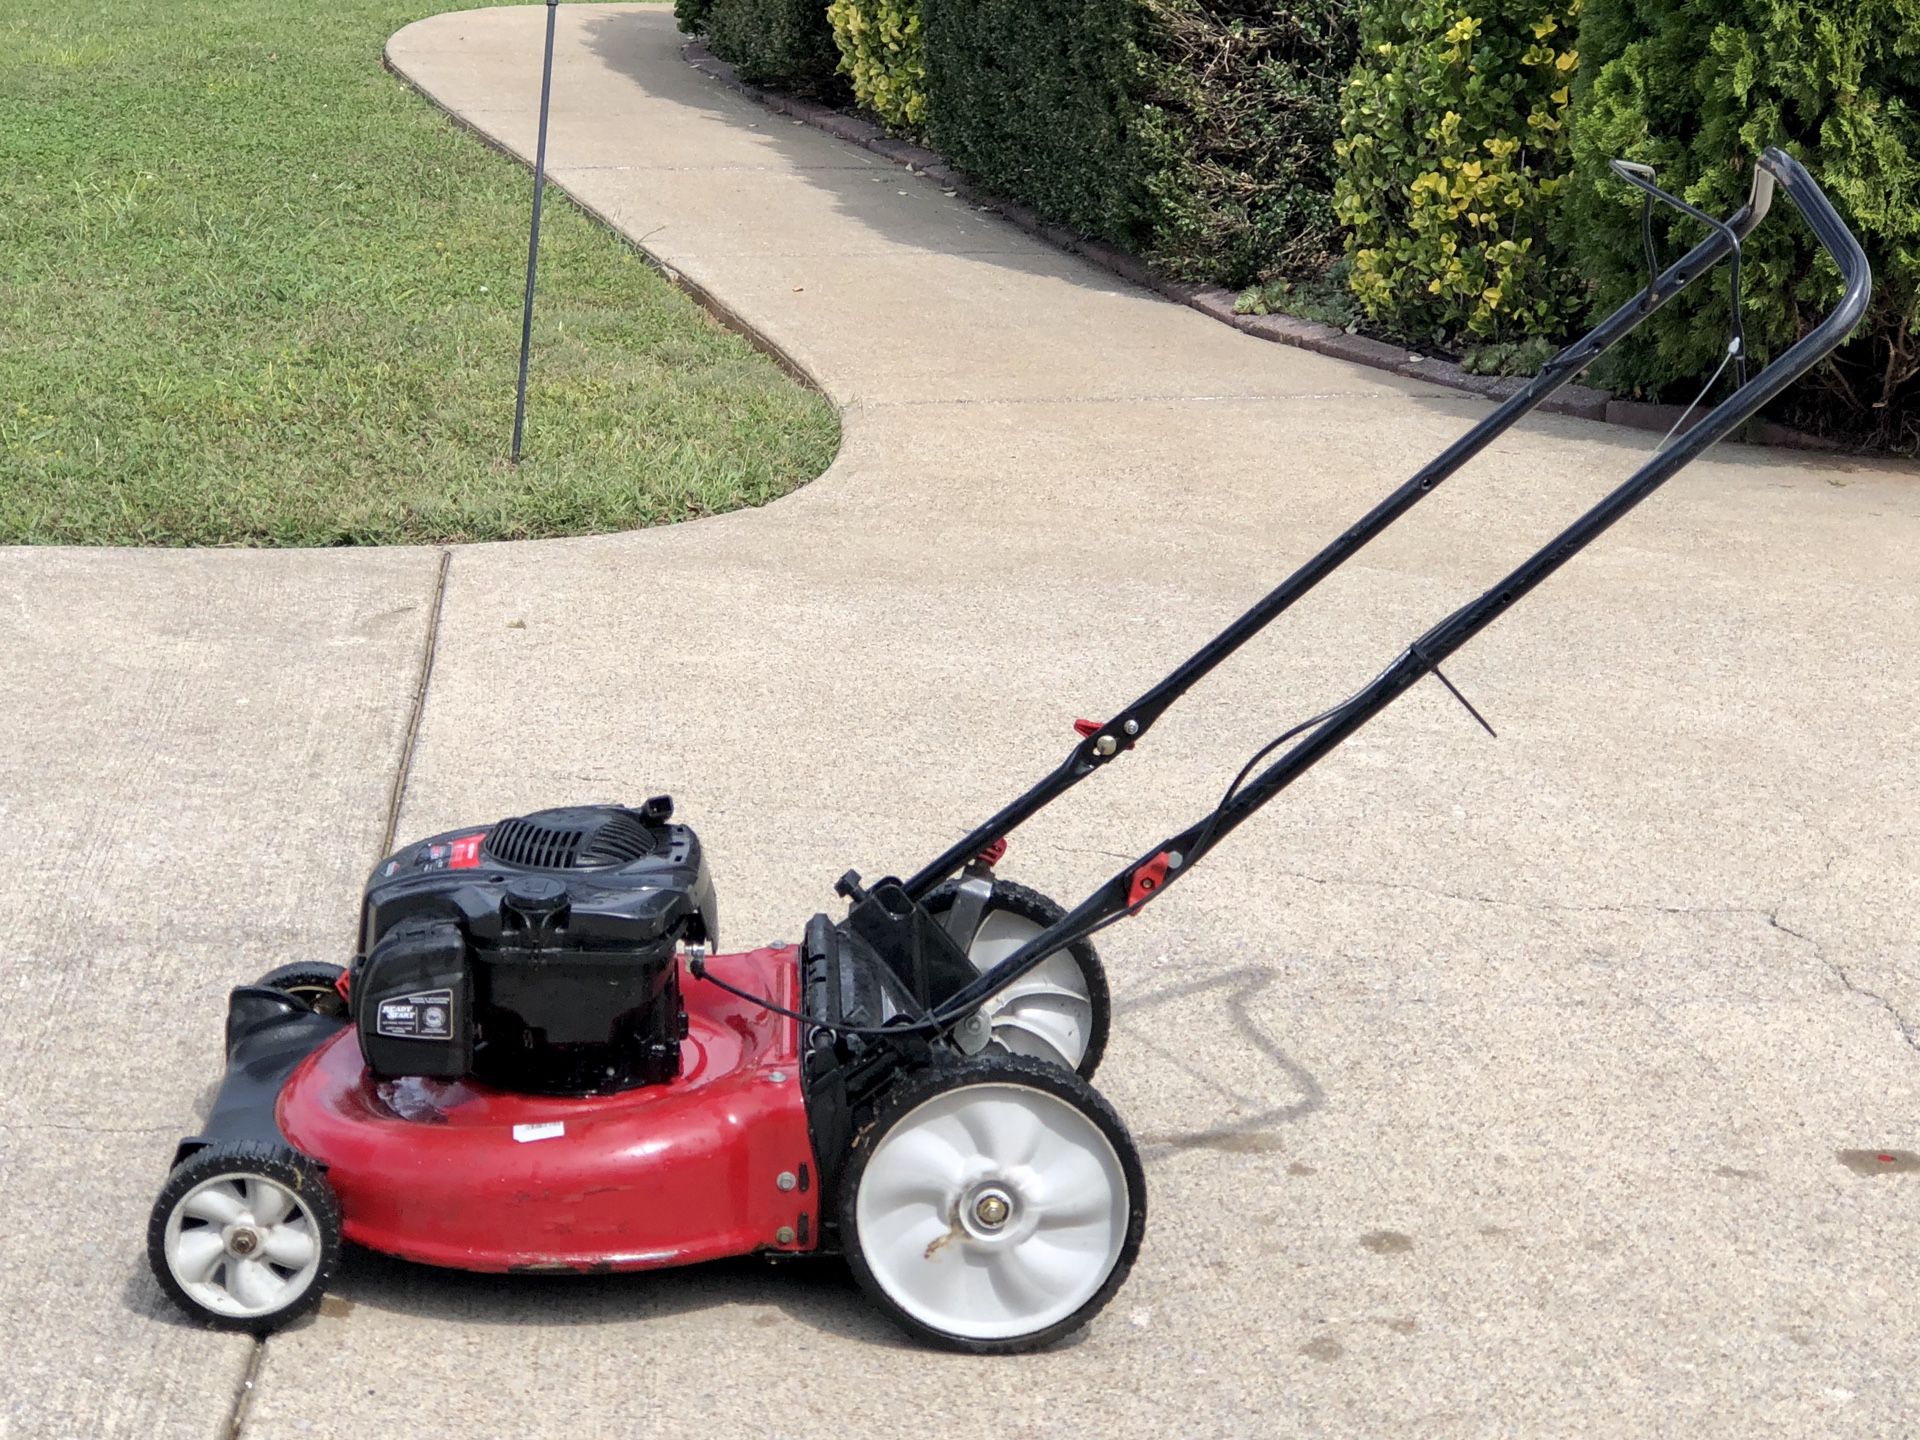 Murray 21” Push Mower In excellent condition! Starts with the first pole every time. Serviced and ready to go.